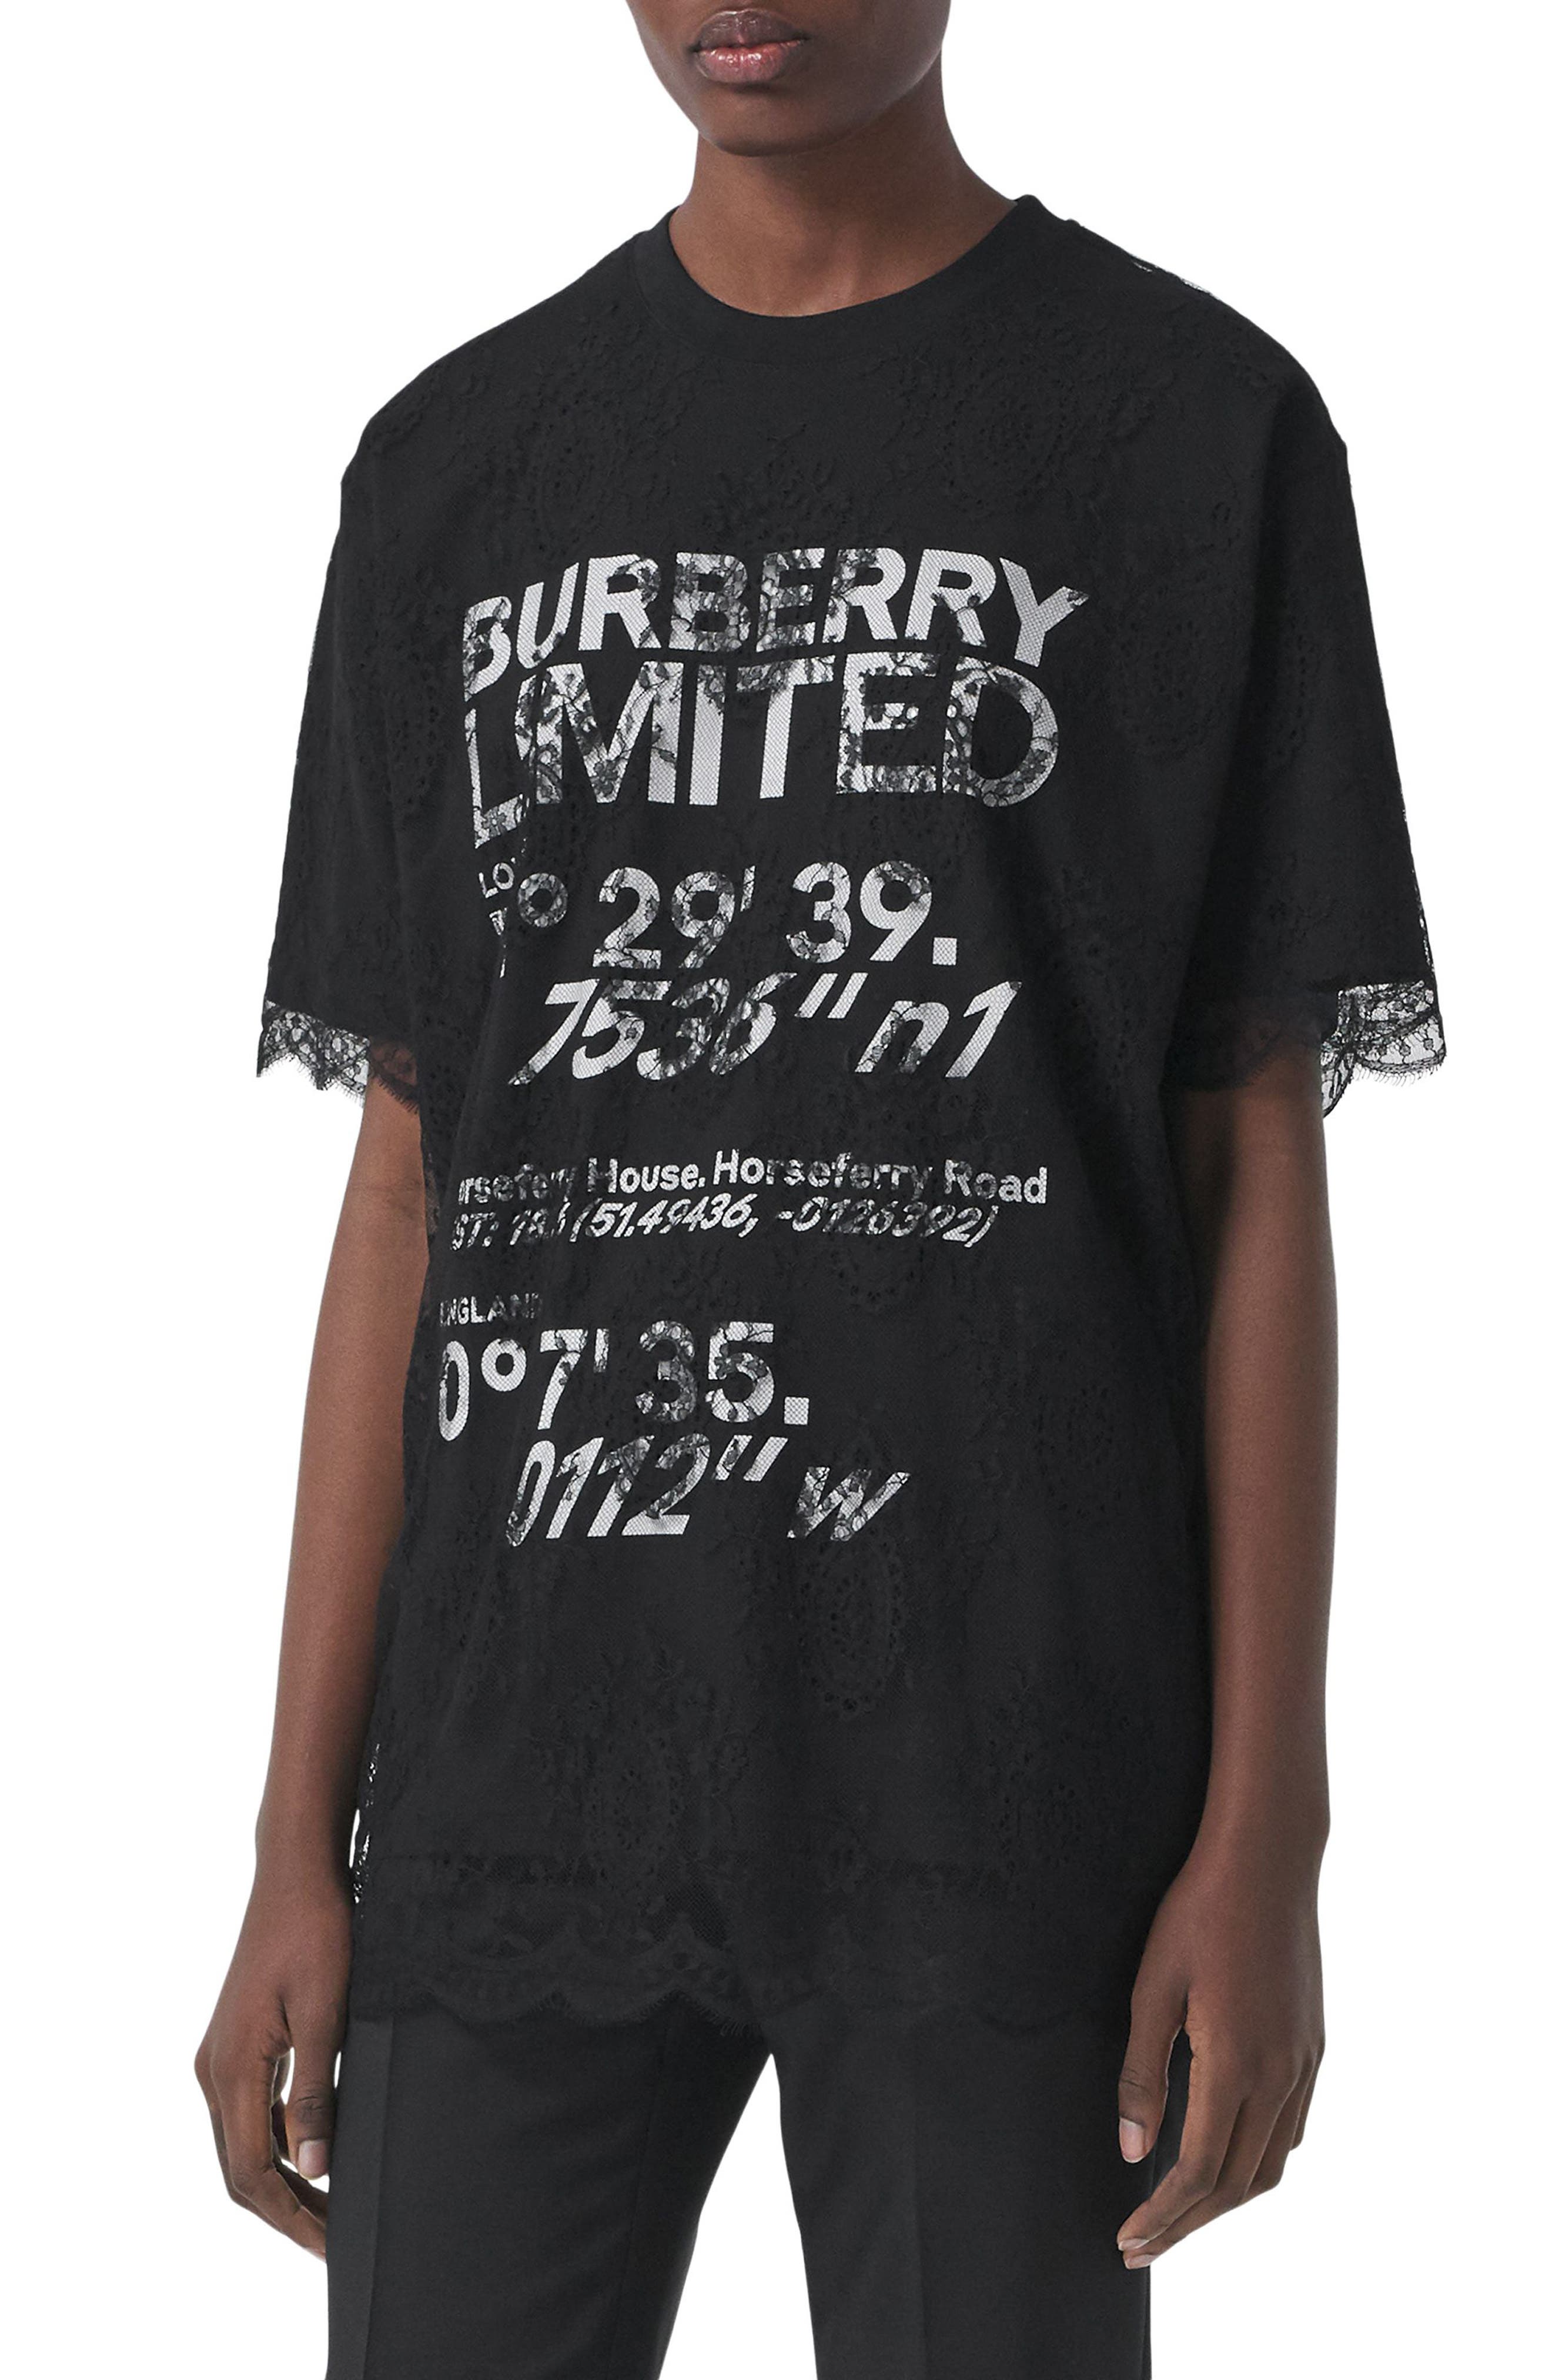 Burberry Falco Lace Overlay Logo Graphic Tee in Black at Nordstrom, Size Xx-Small